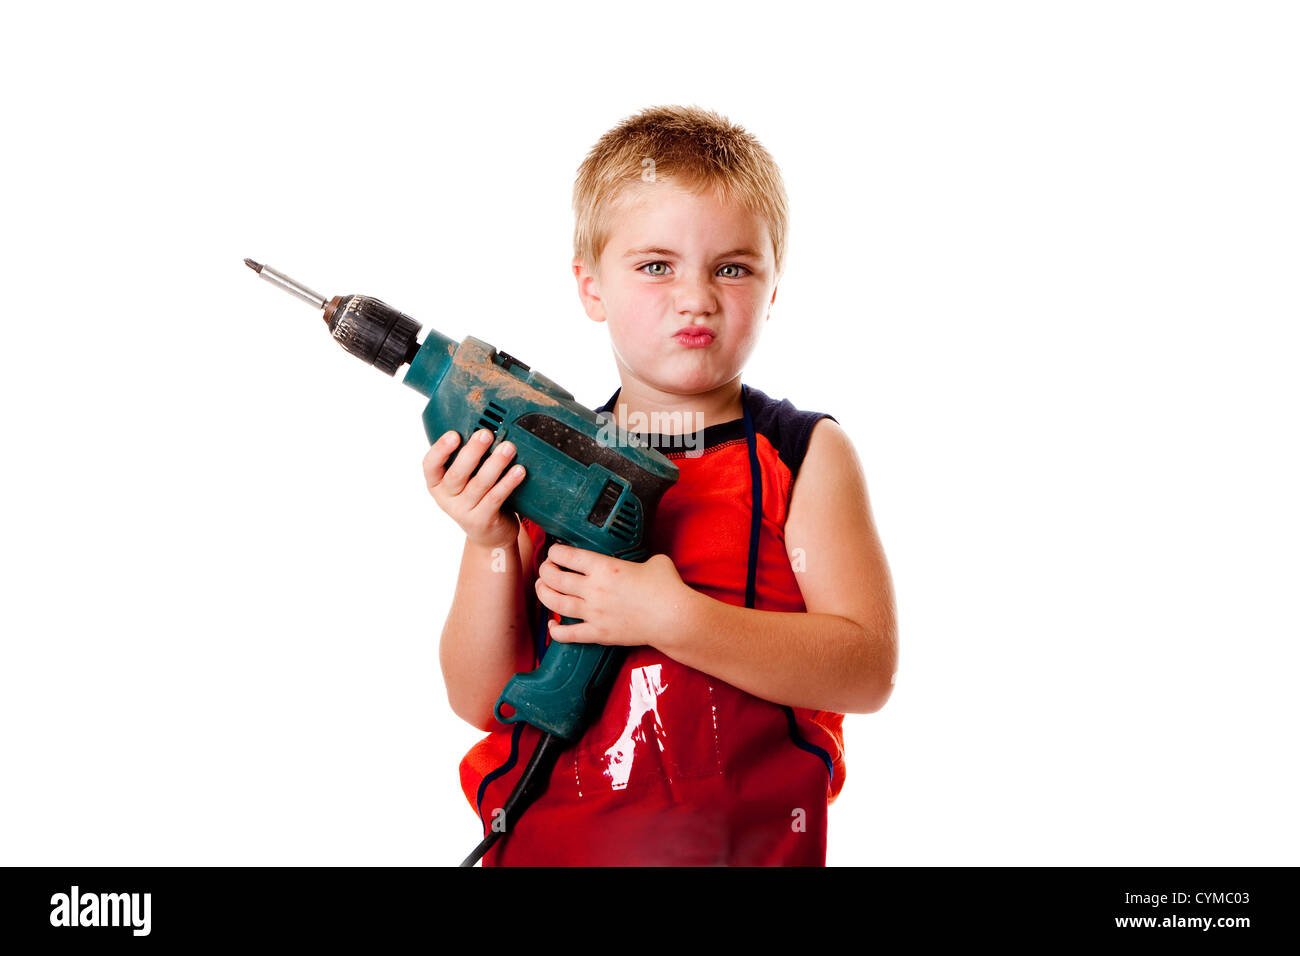 Macho boy child with heavy duty drill and lots of attitude, isolated. Stock Photo